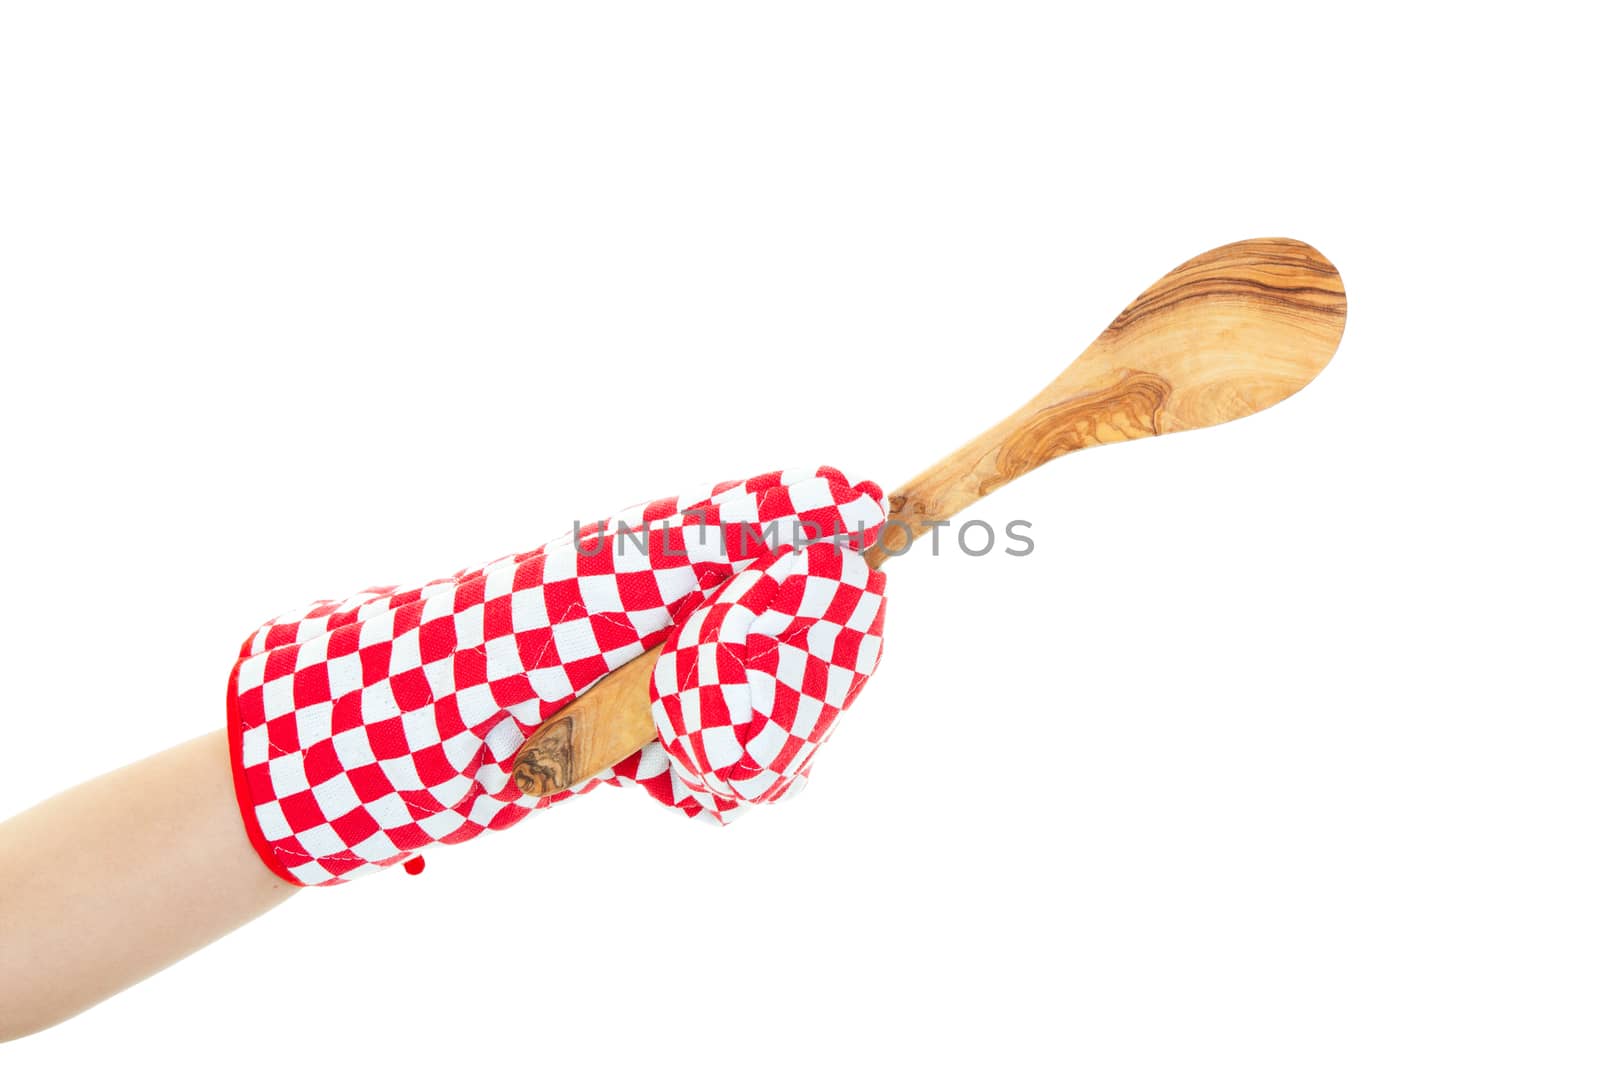 Oven Mitt Arm with Spoon by songbird839